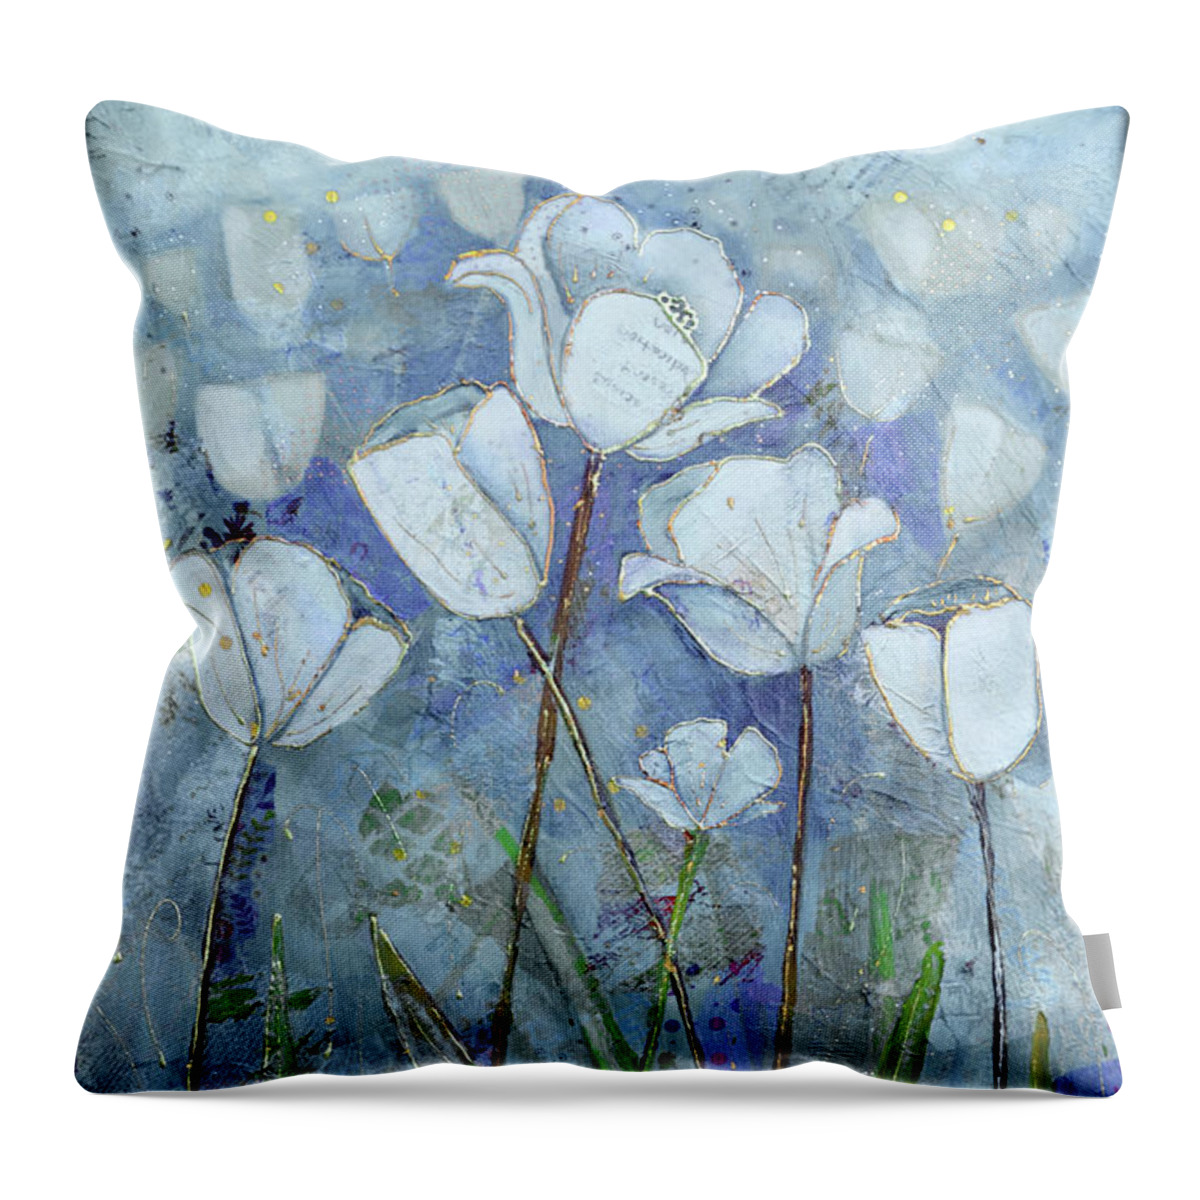 Cervical Cancer Throw Pillow featuring the painting Twilight Tulips by Shadia Derbyshire